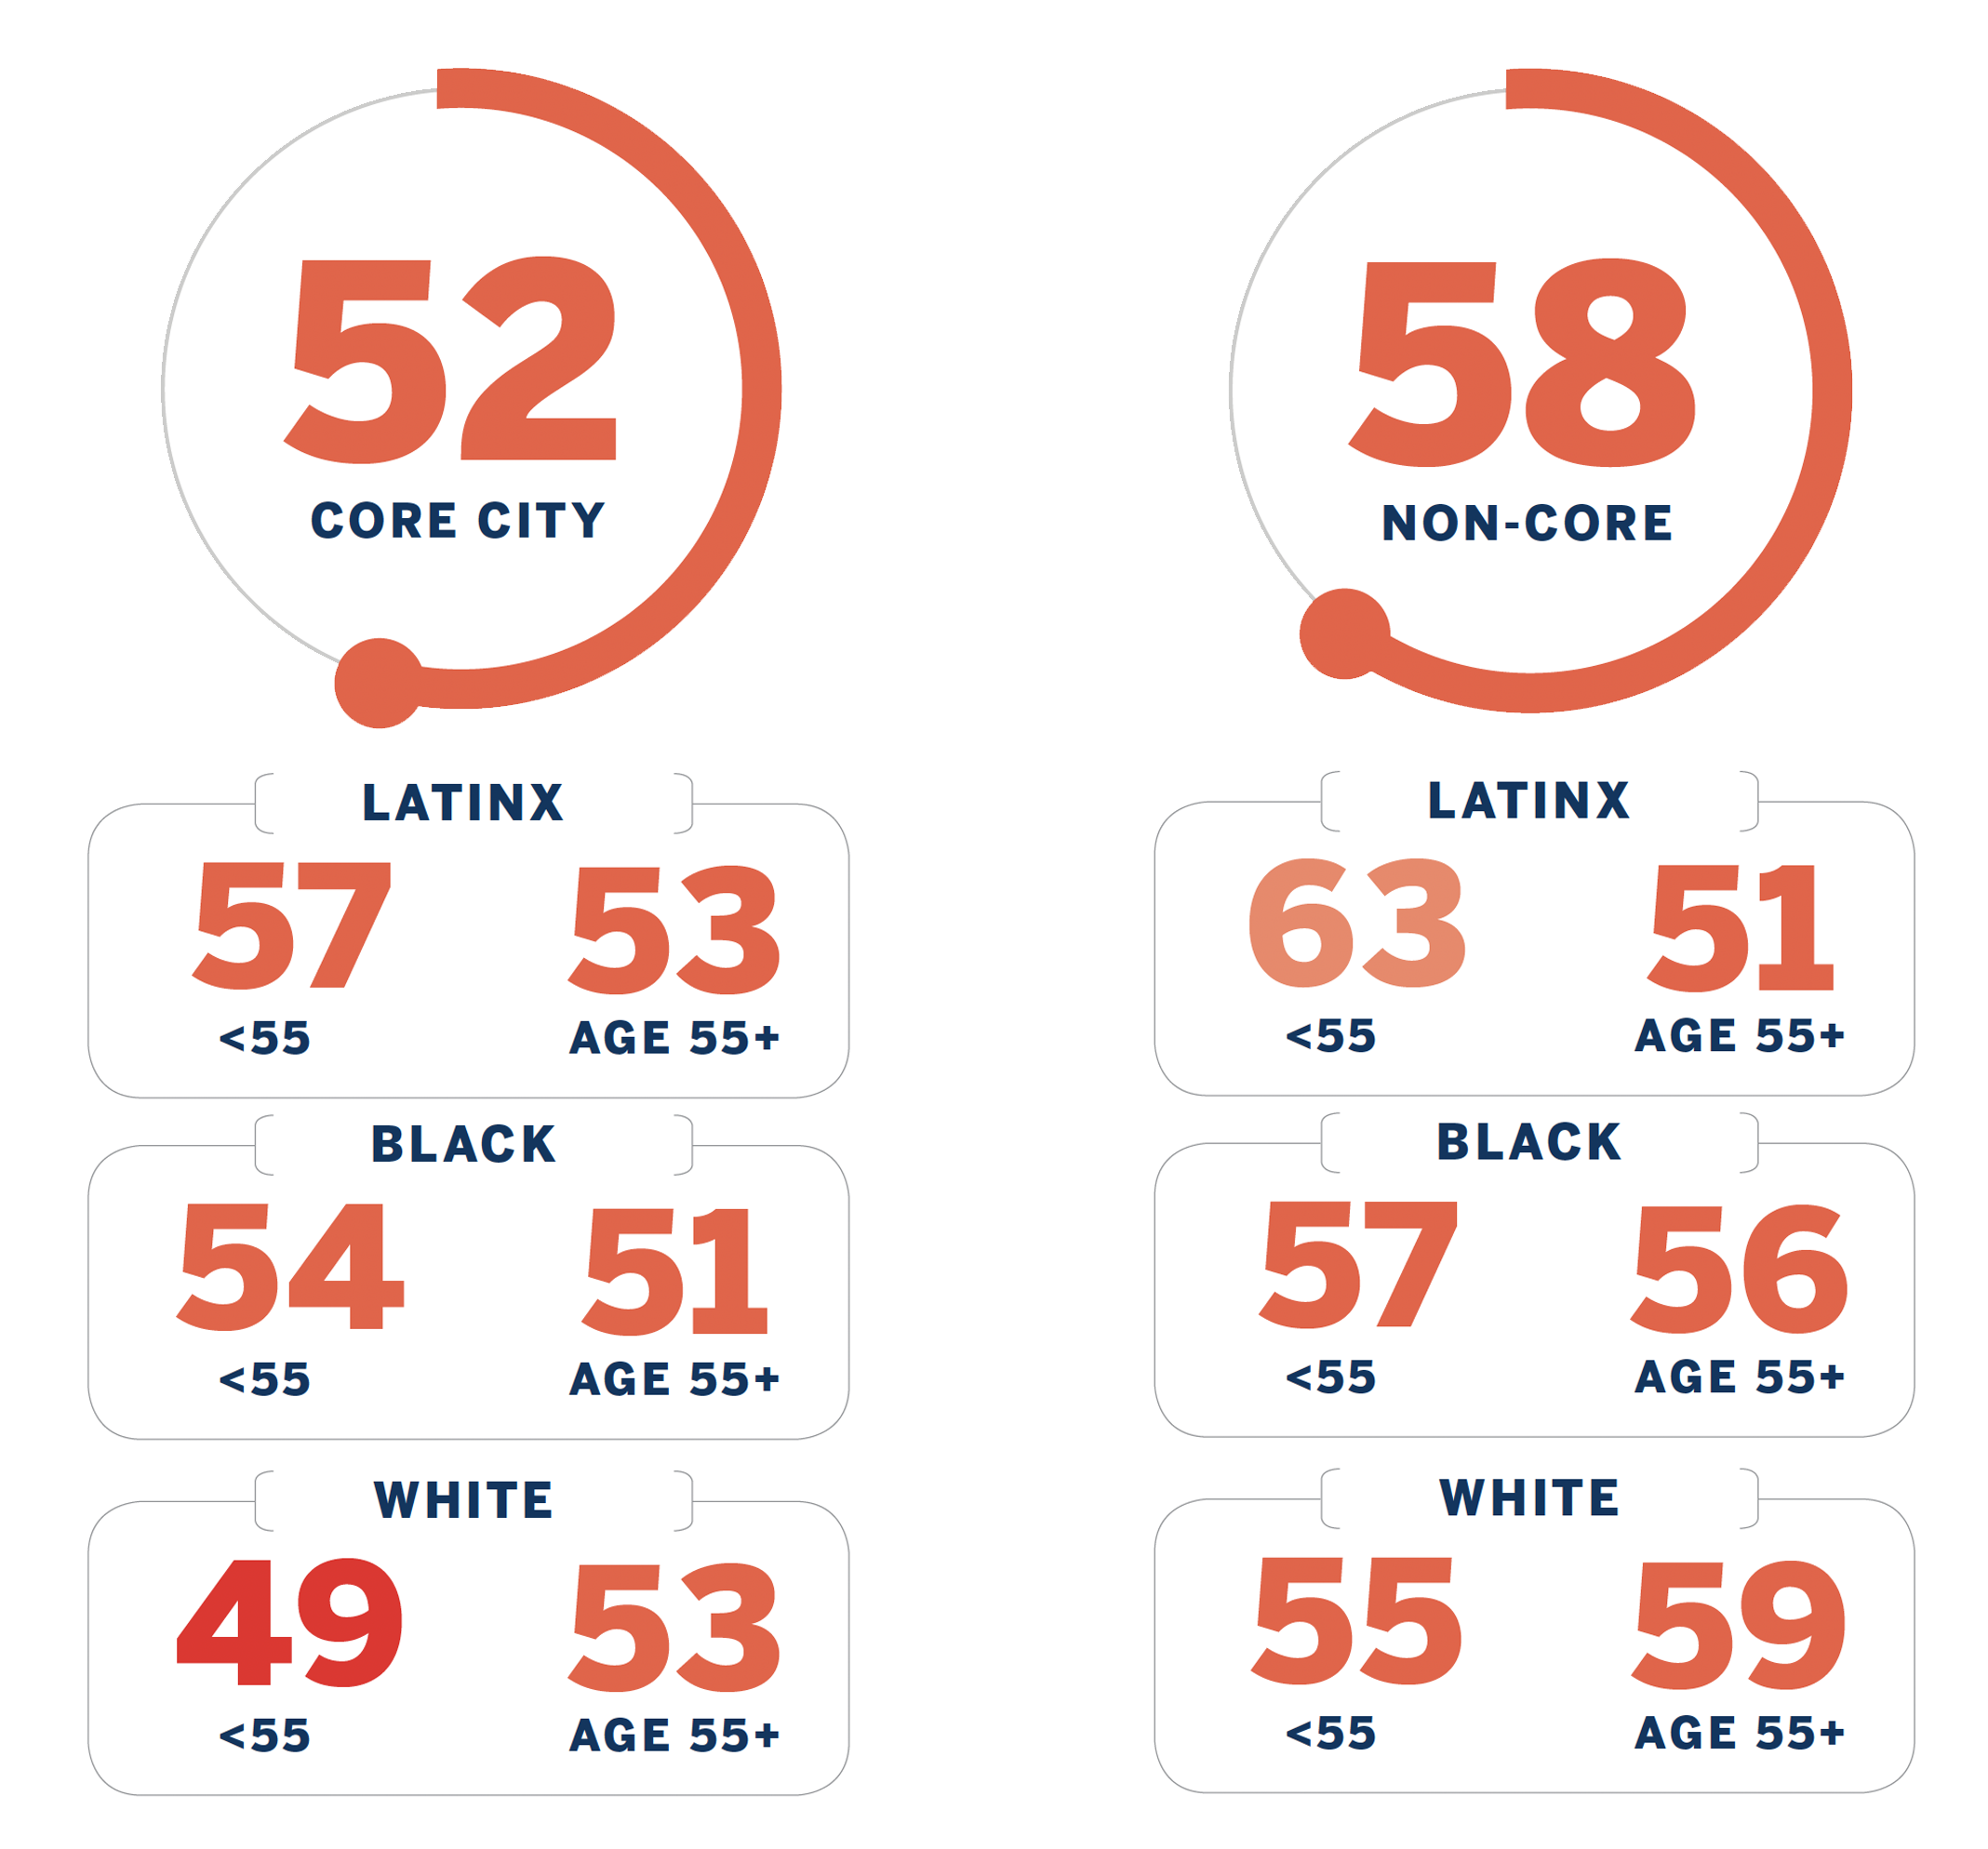 Chart breakdown: Core City: 52 (broken down by Latinx, Black, and White ages less than and over 55) Non-Core: 58 (broken down by Latinx, Black, and White ages less than and over 55)